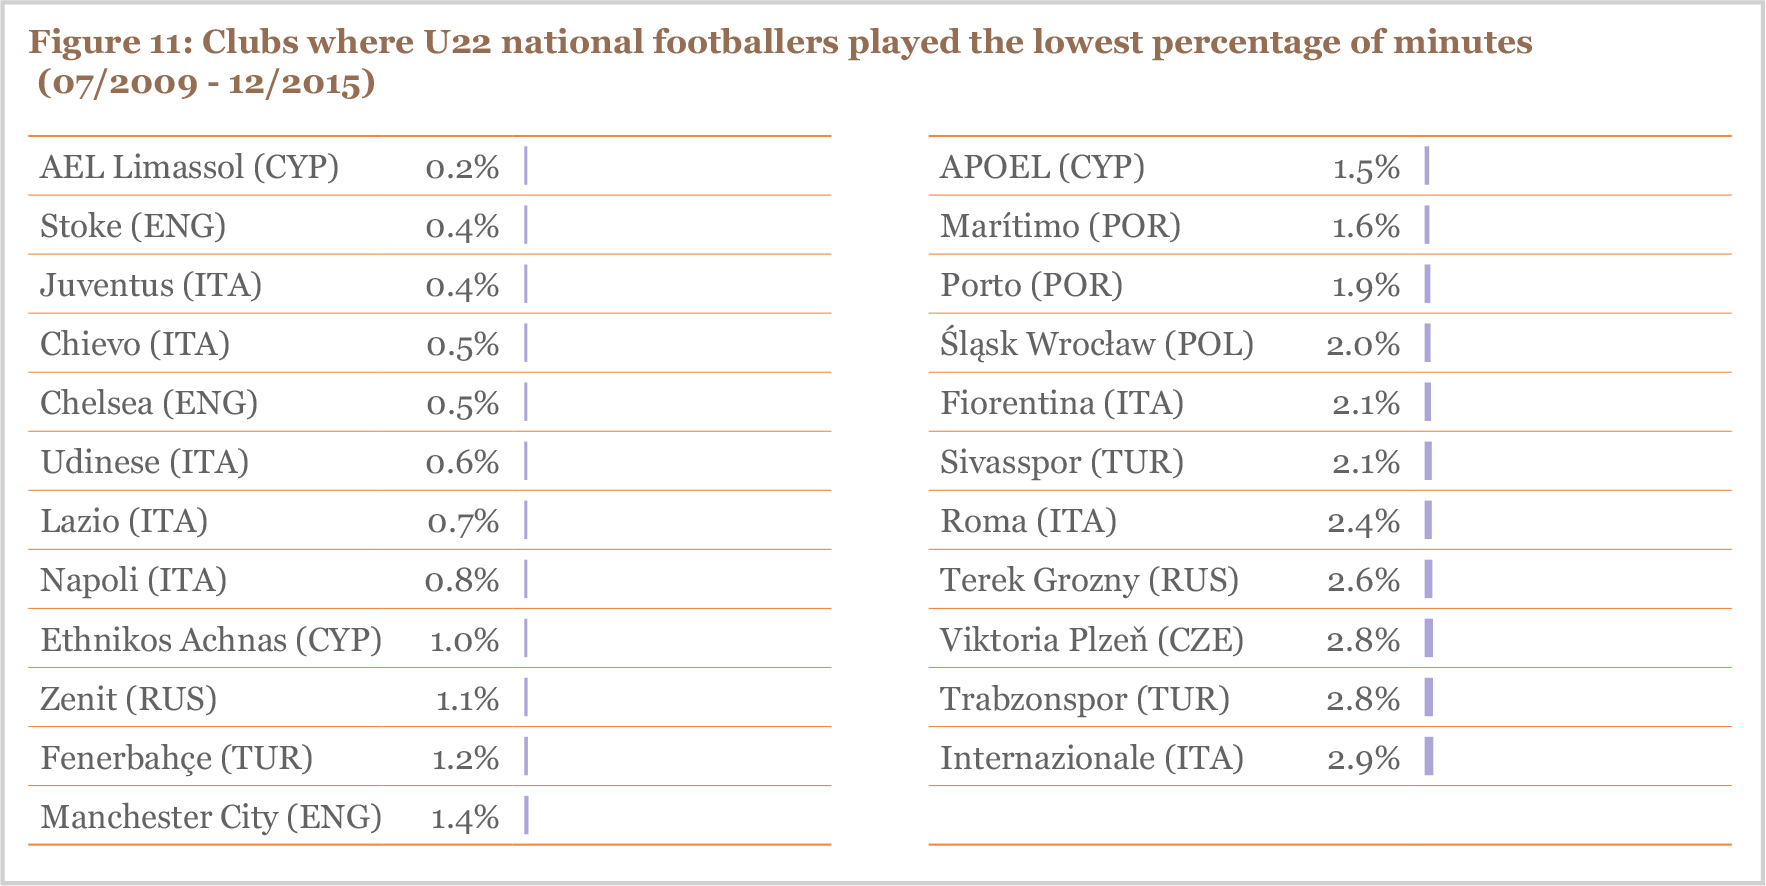 Clubs where U22 national footballers played the lowest percentage of minutes (07/2009 - 12/2015)